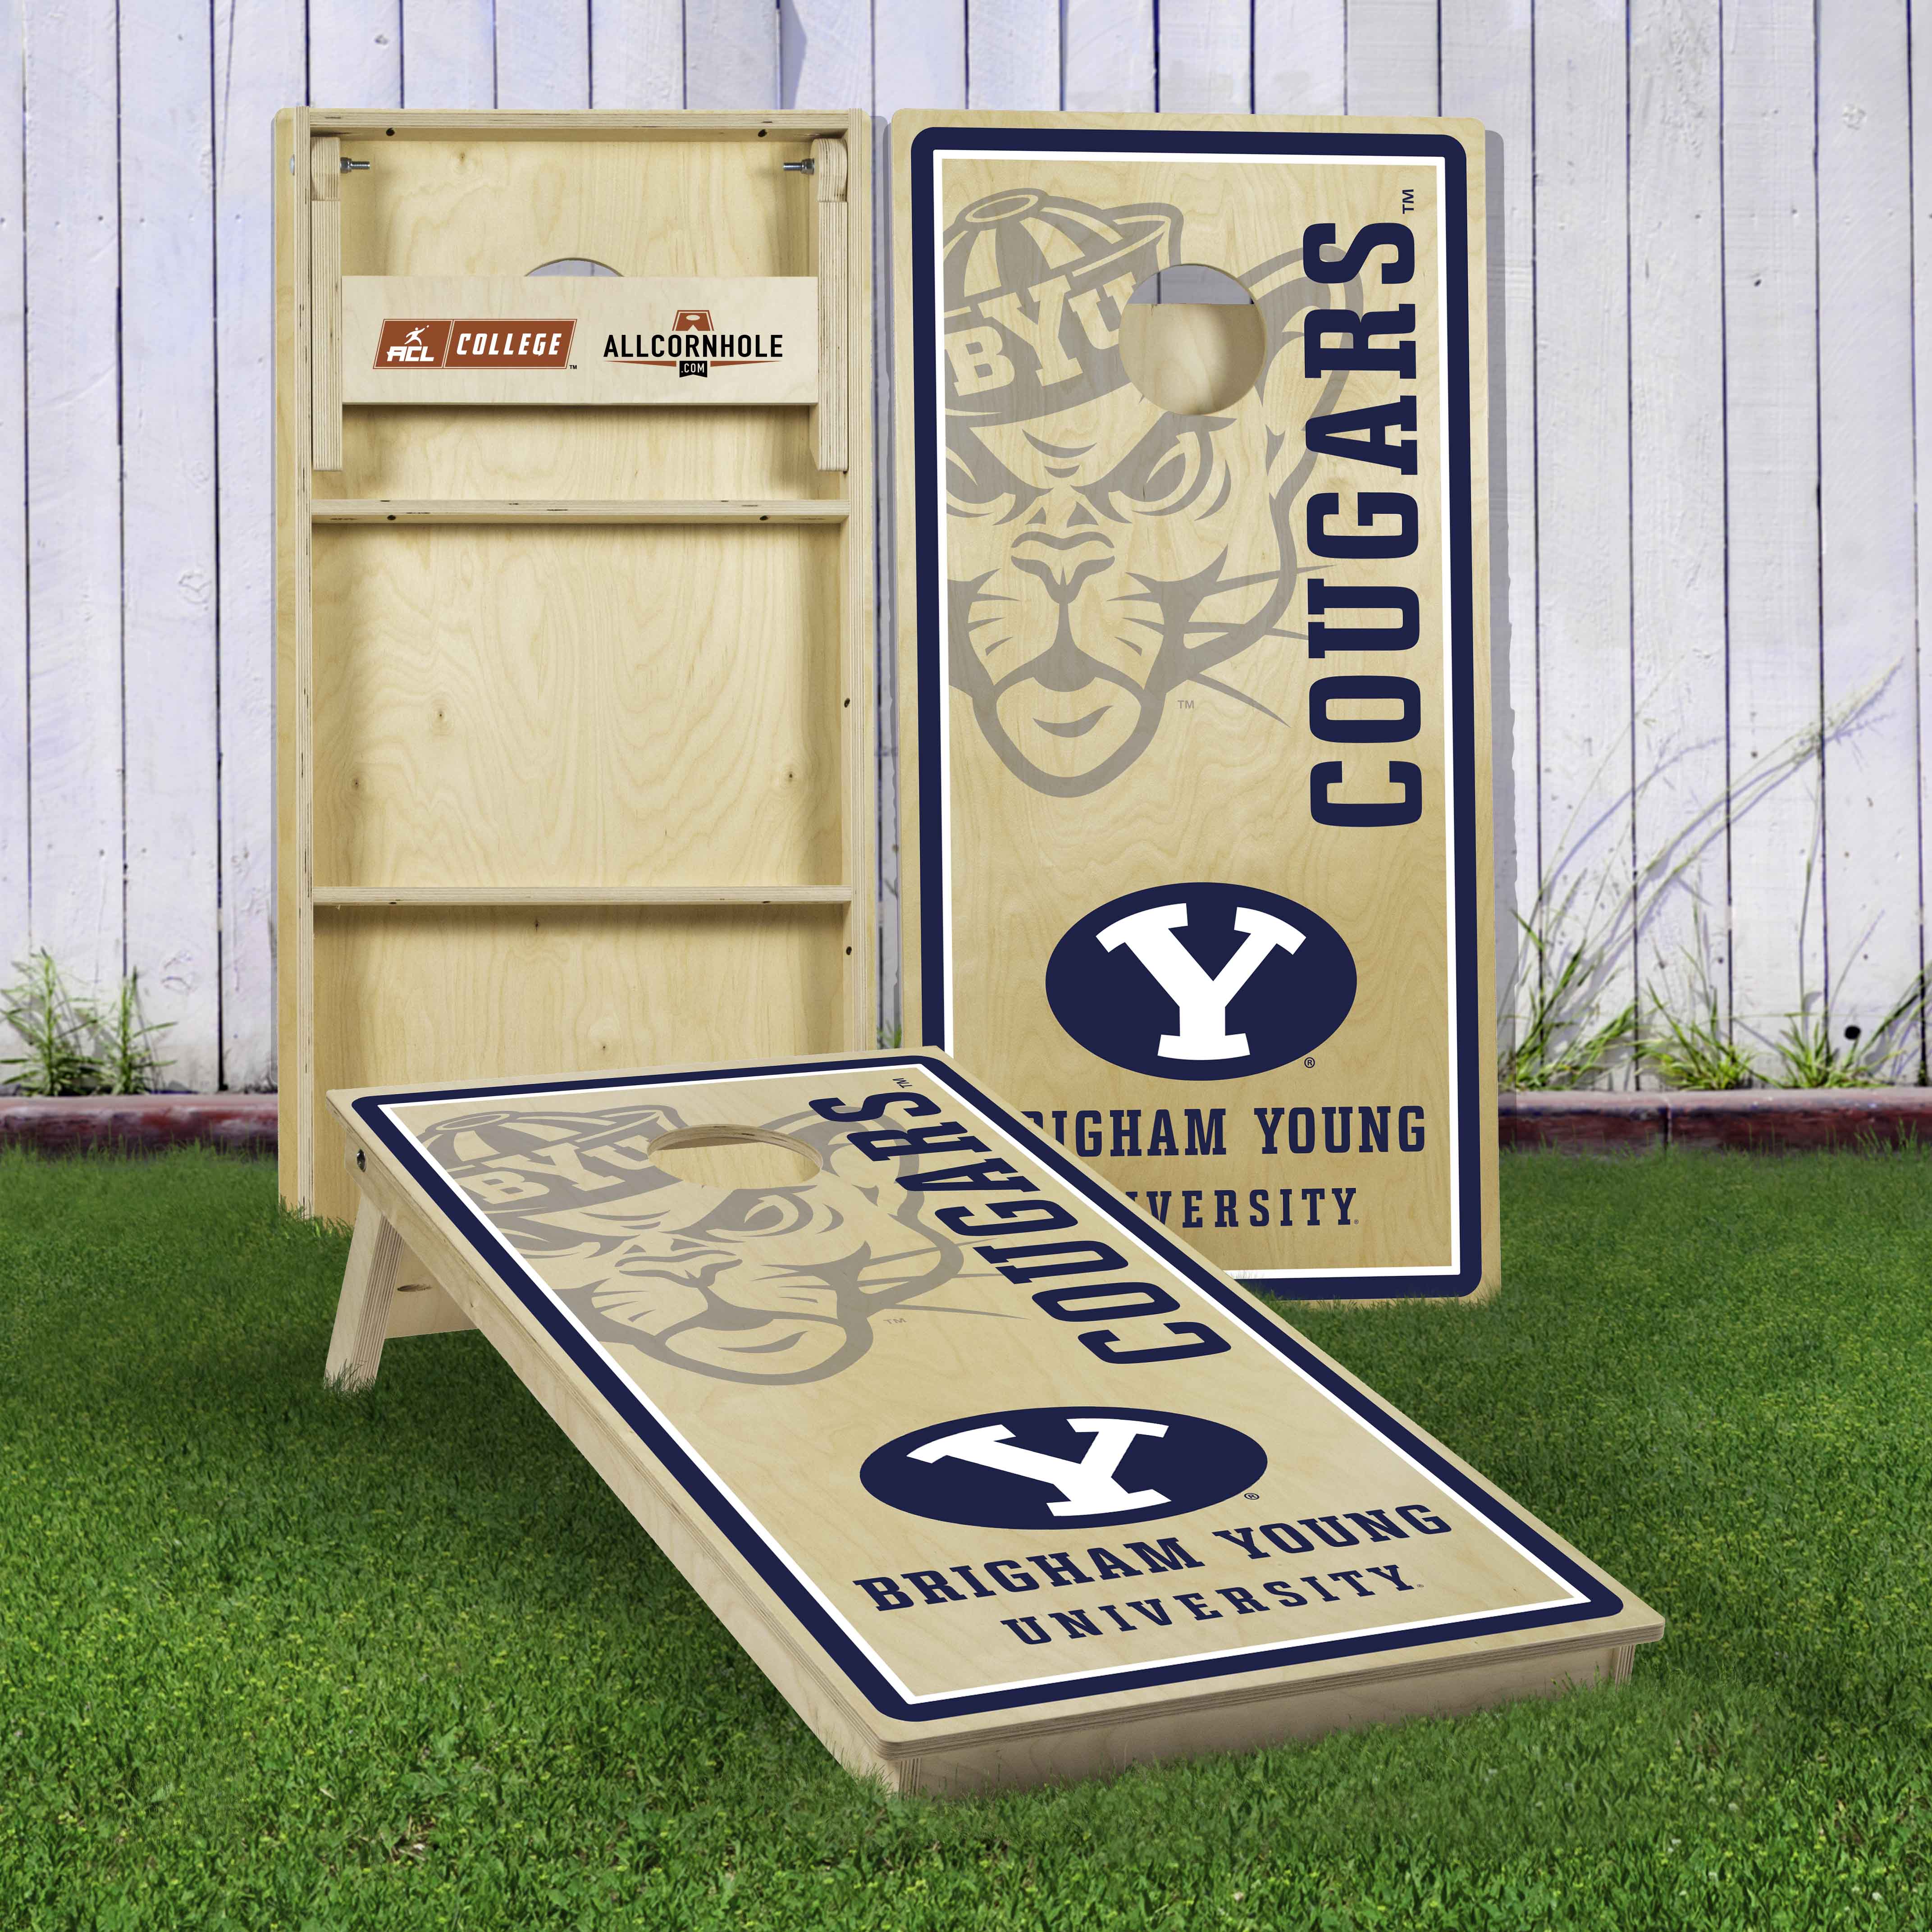 Officially Licensed Collegiate Cornhole Boards - Brigham Young University